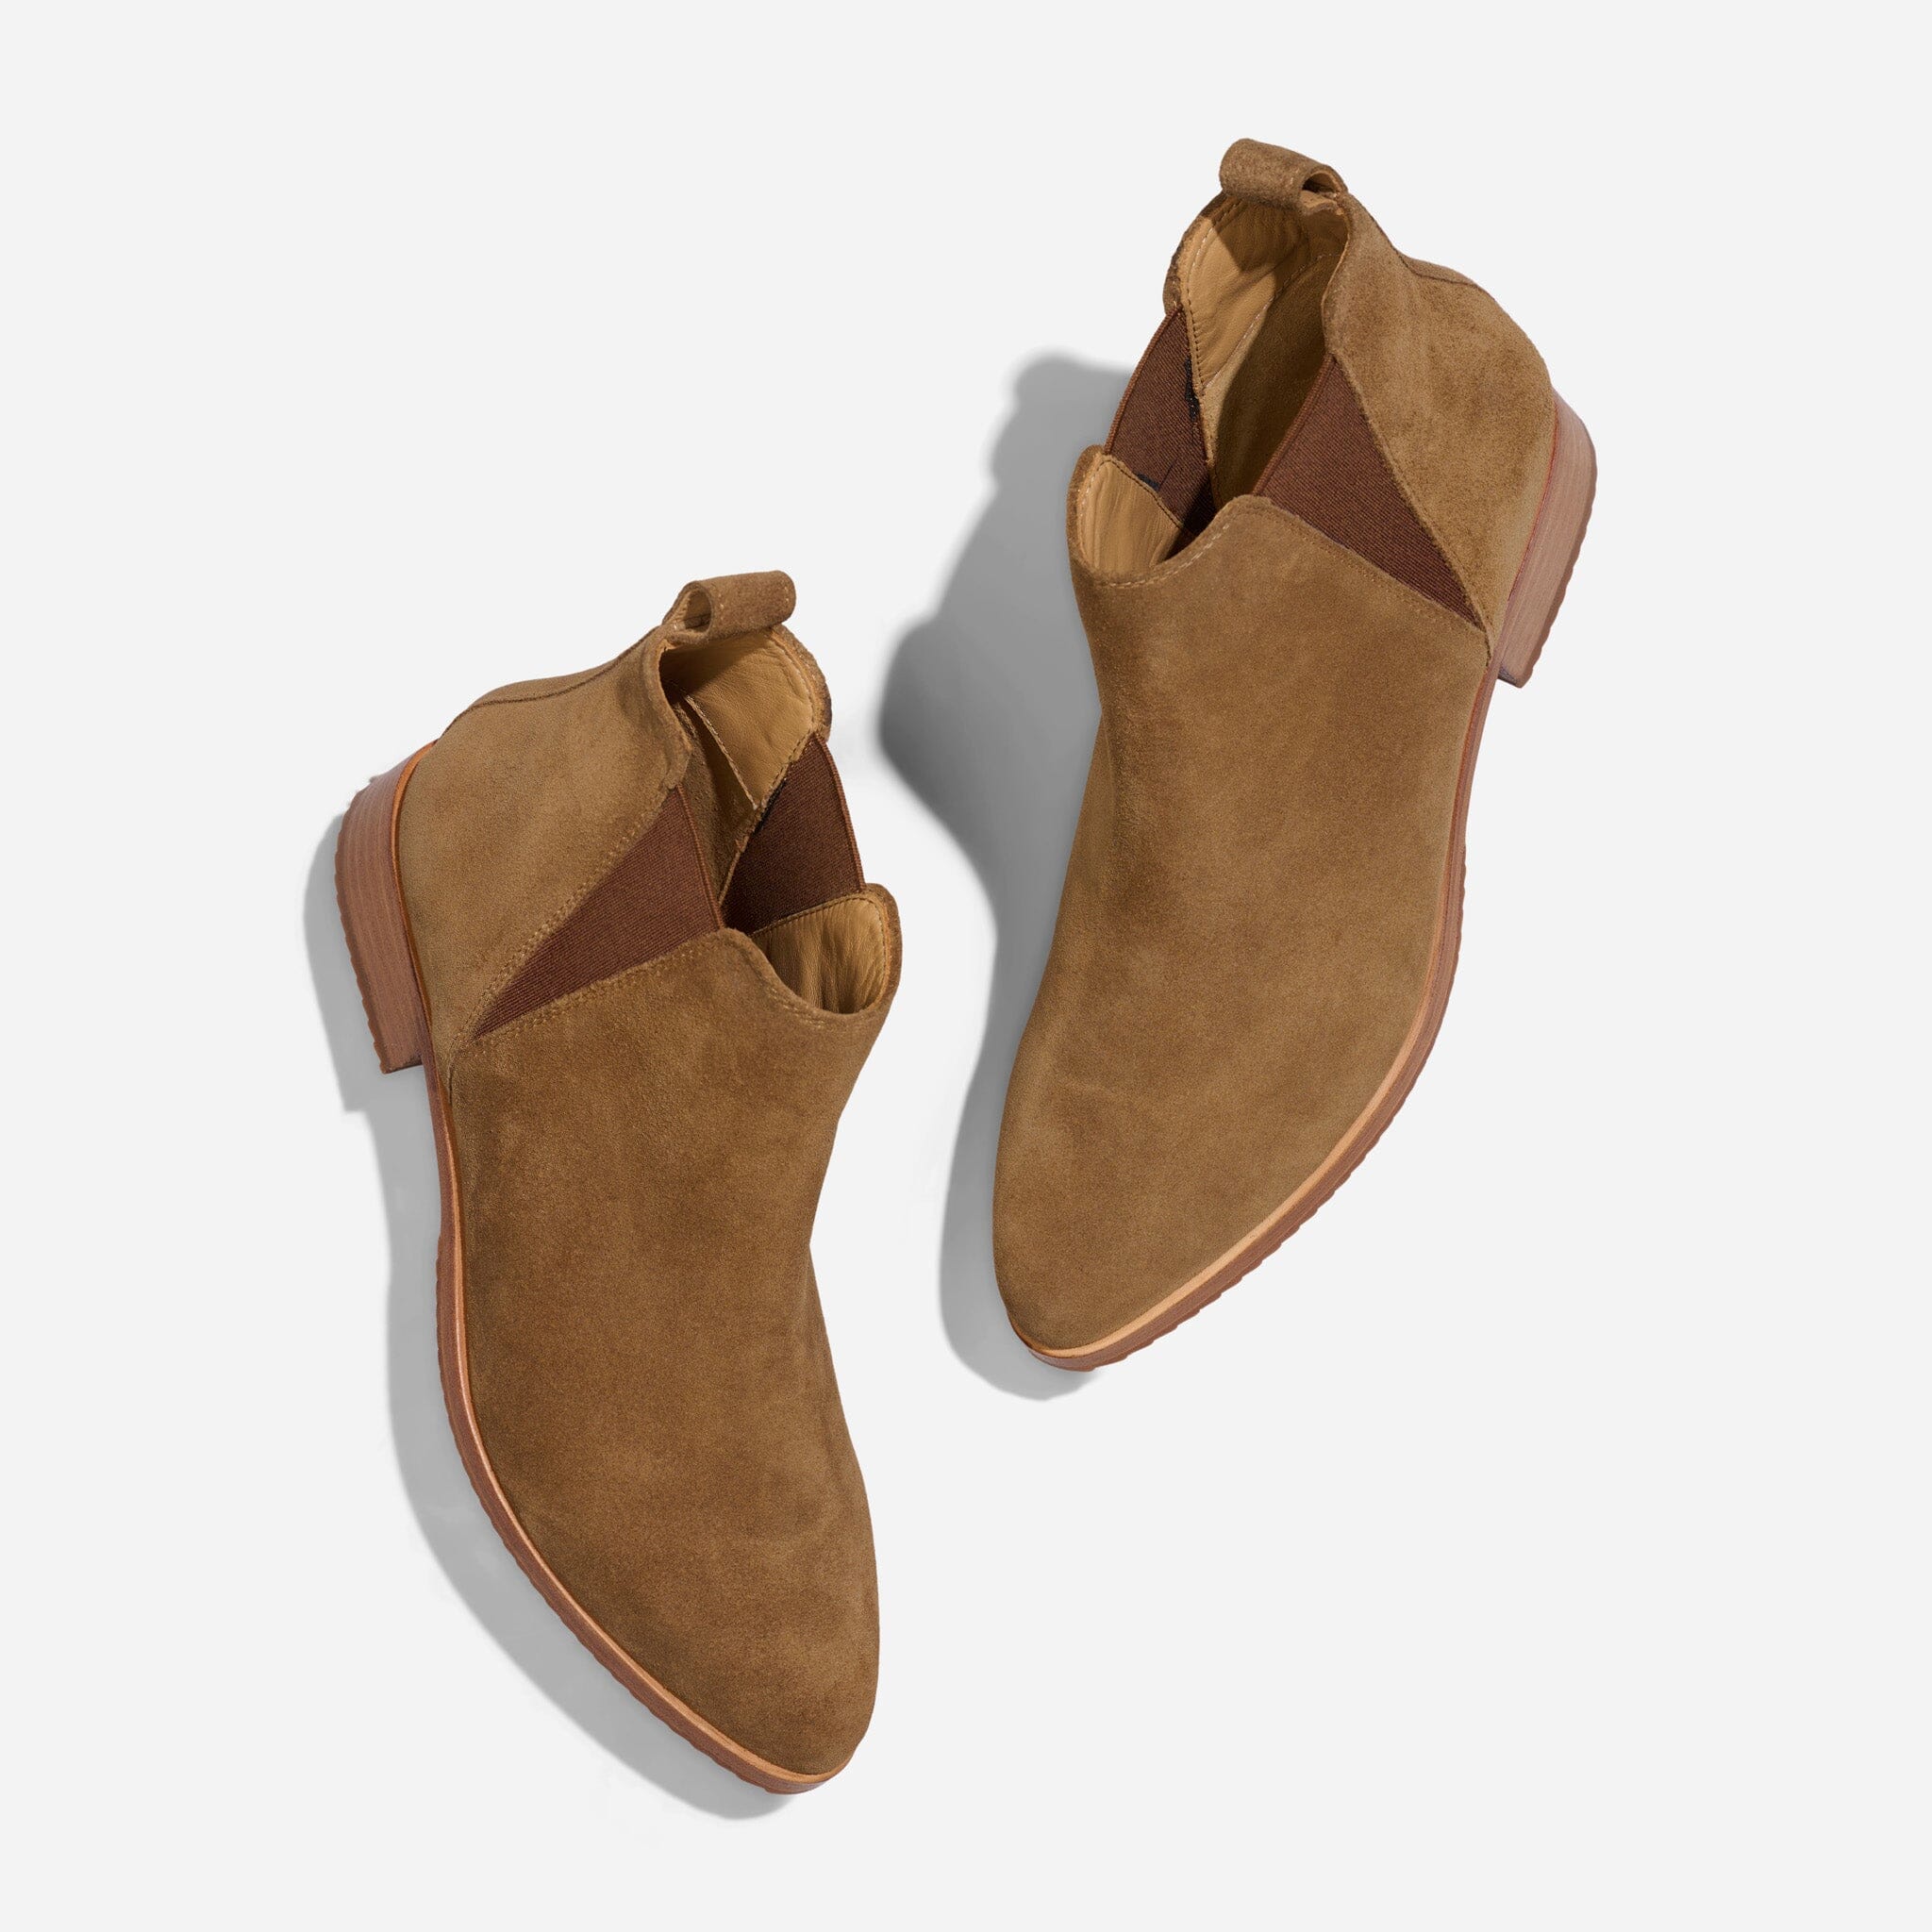 Eva Everyday Chelsea Boot Taupe-Suede Nisolo 